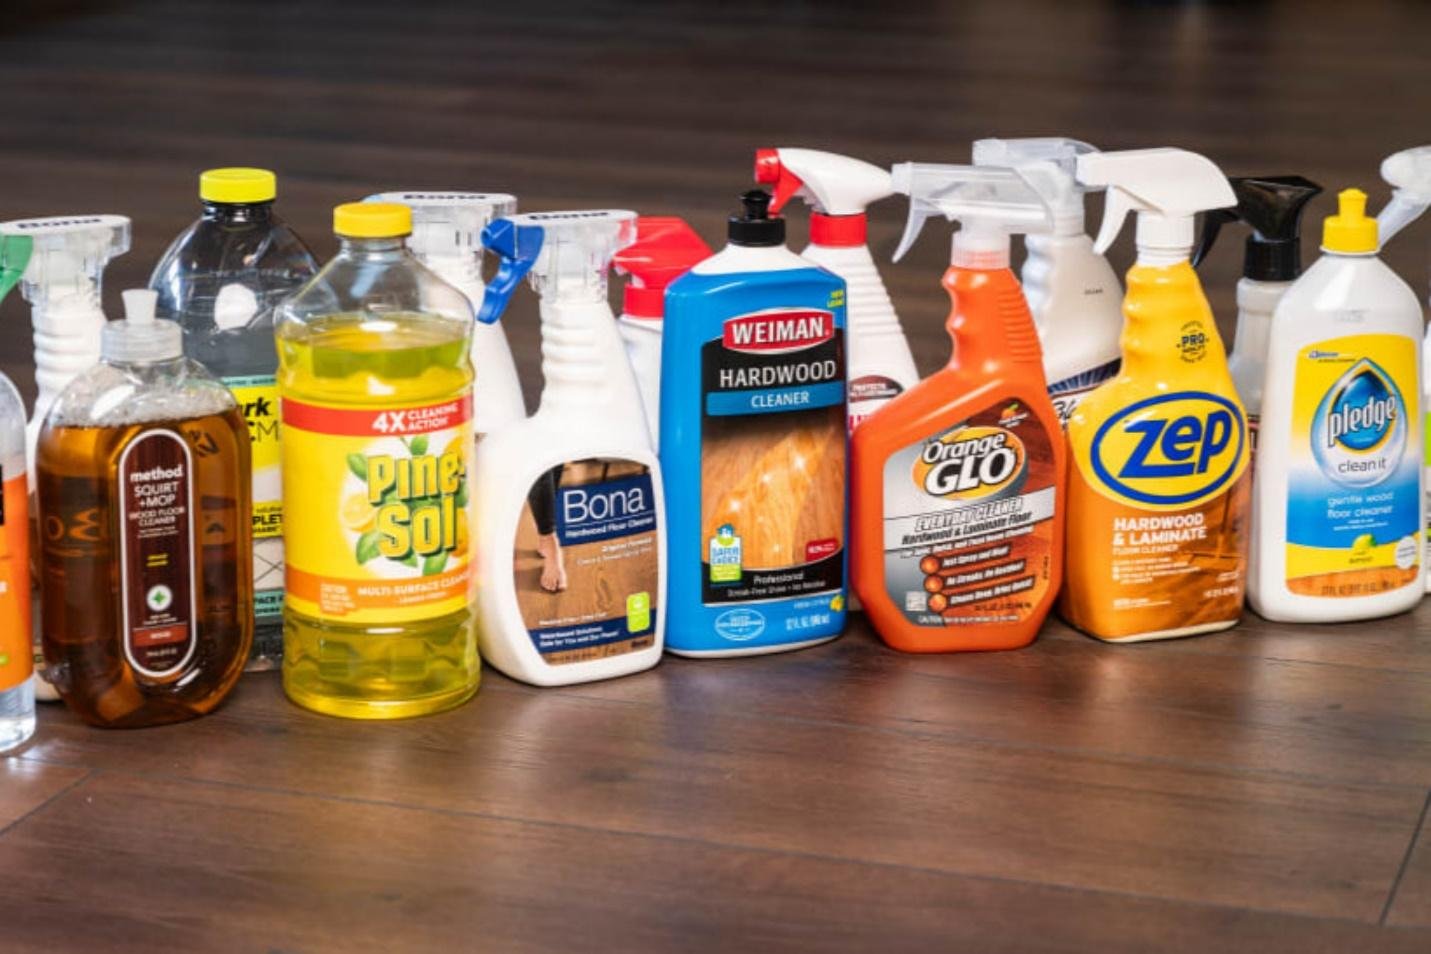 HARDWOOD FLOOR CLEANING PRODUCTS